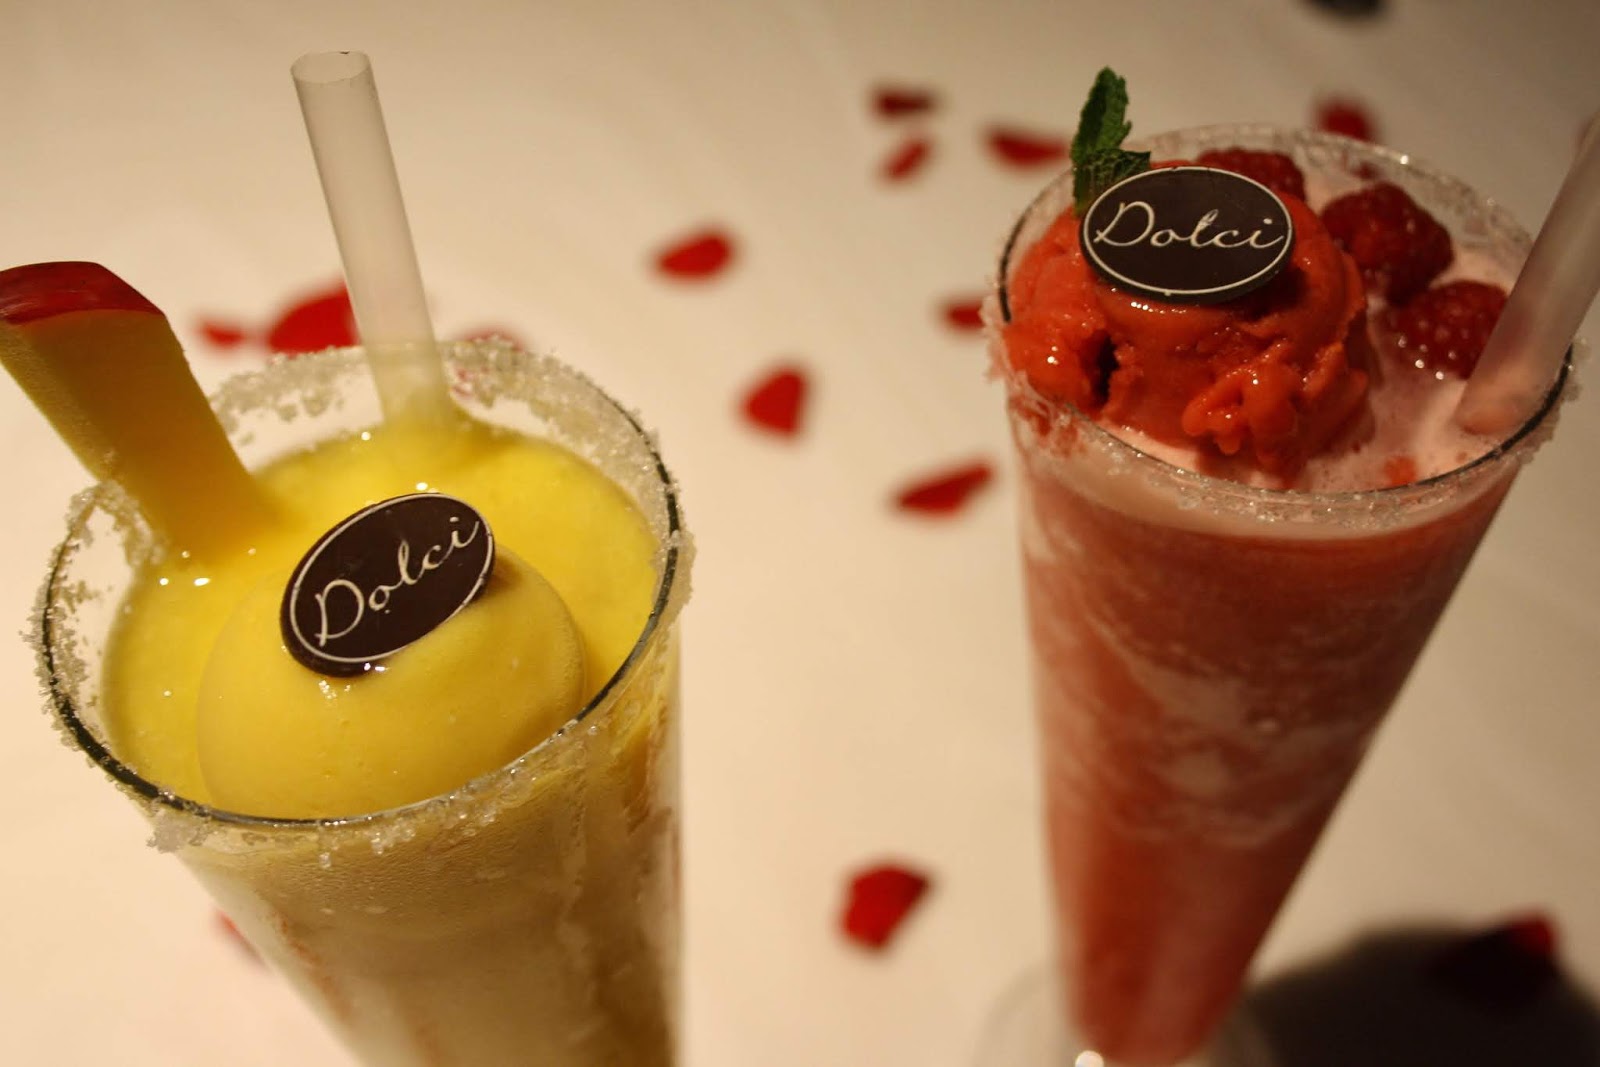 two haute dolci mocktails at the Leicester restaurant, one yellow, one red